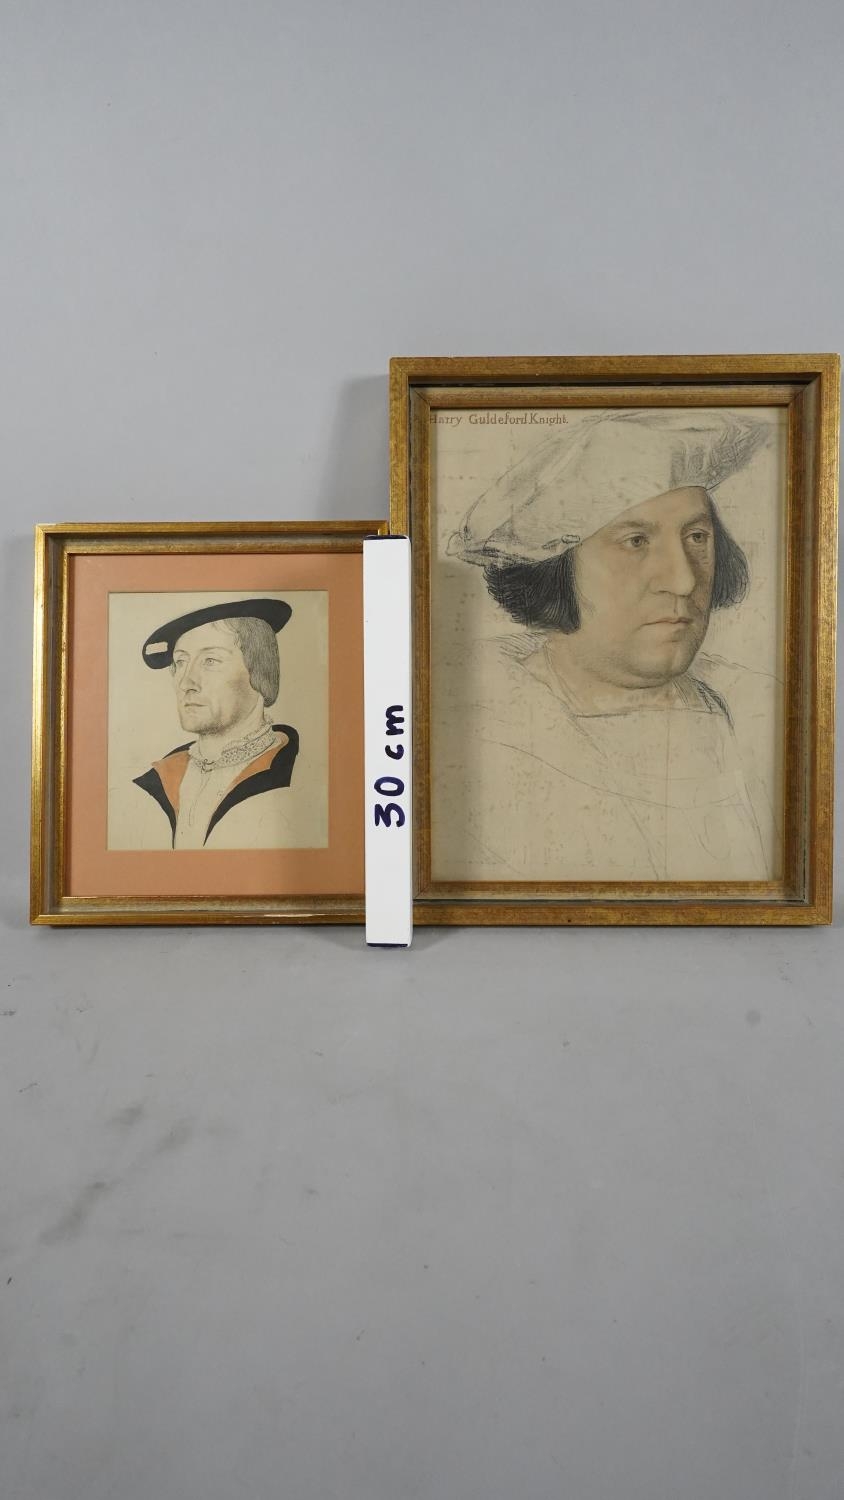 Two framed and glazed prints of drawings. One by Holbein the Younger of Henry Guildford Knight and - Image 9 of 9